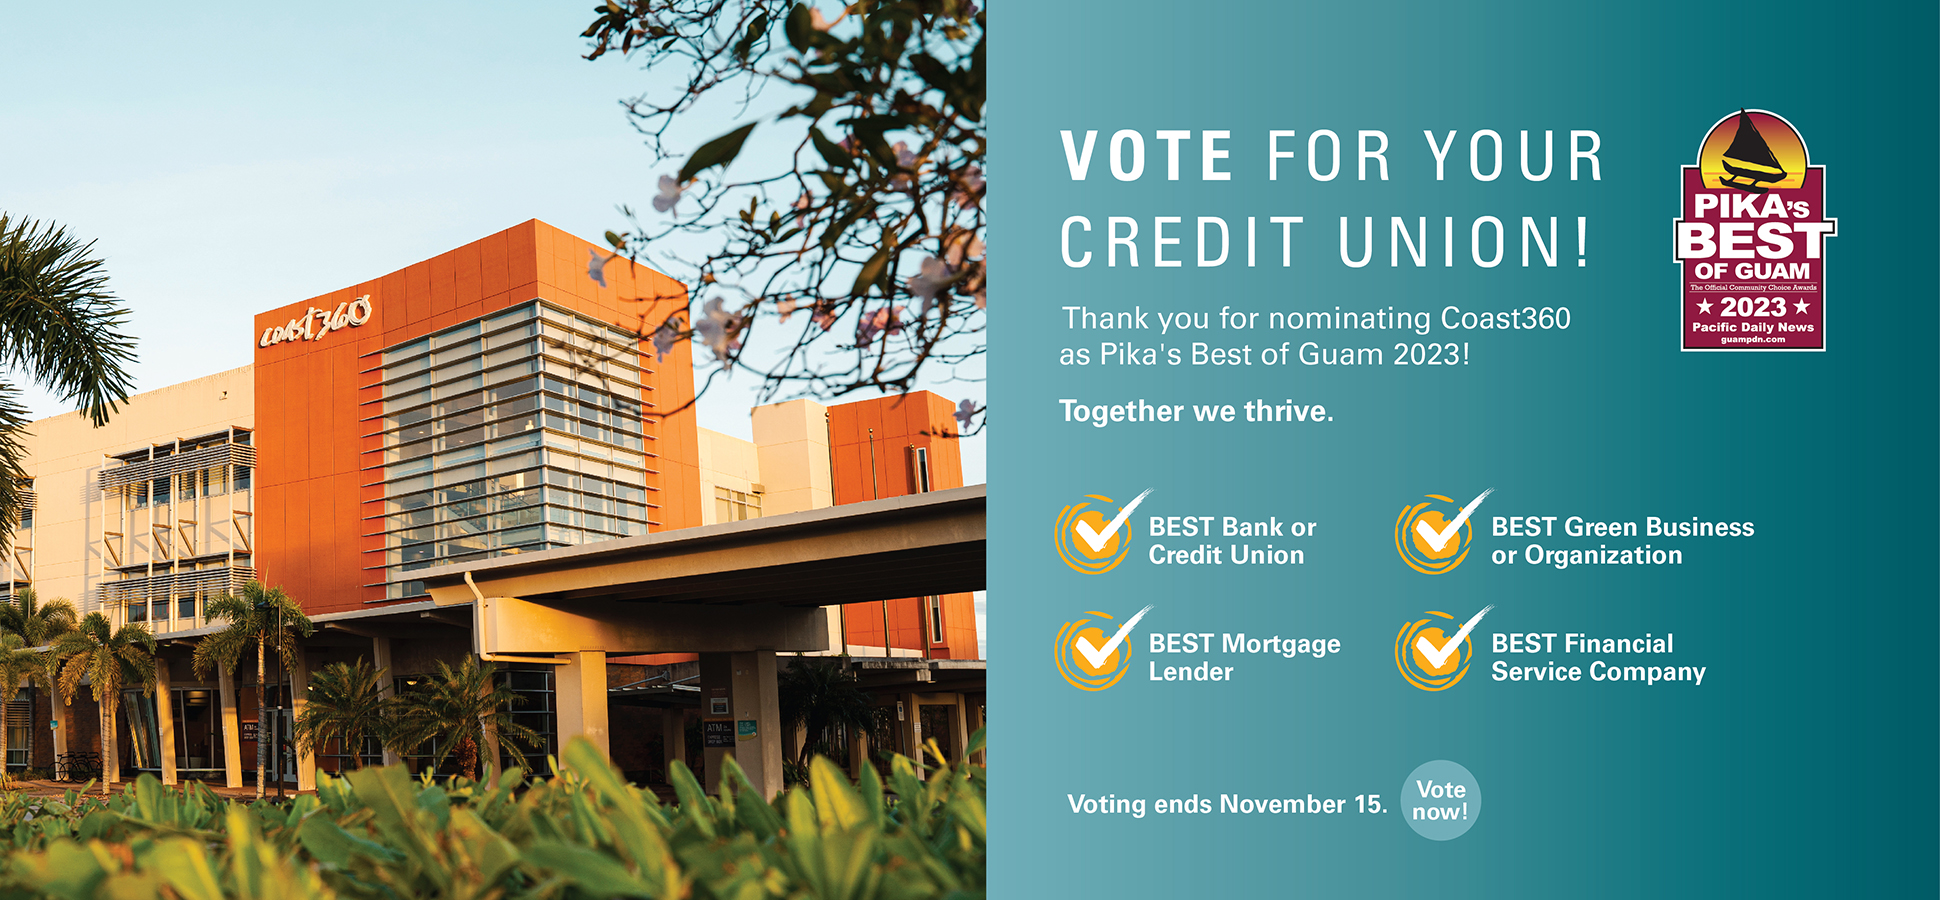 Vote for your credit union as Pikas Best of Guam 2023